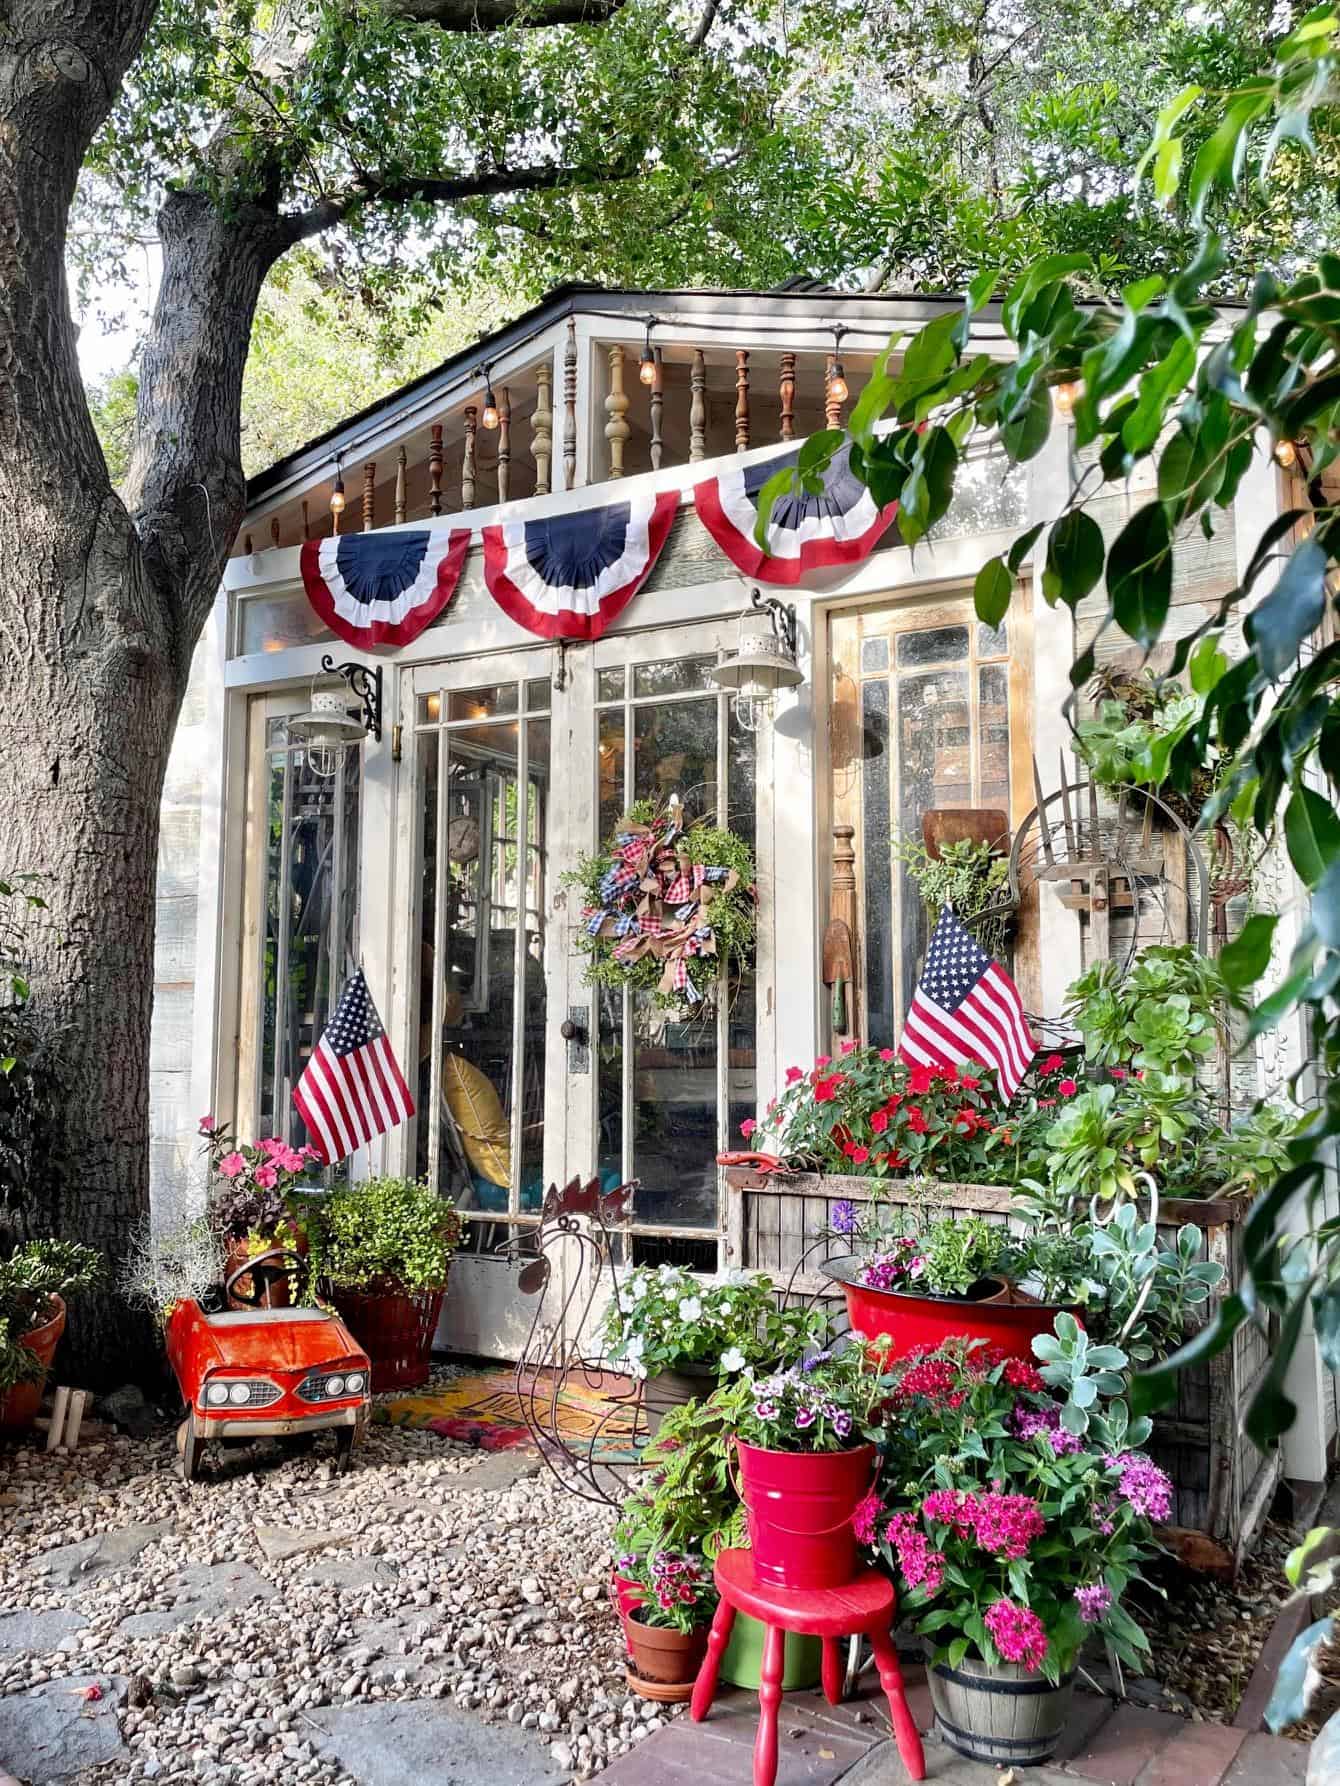 Decorating with American Flag buntings on an outdoor garden shed